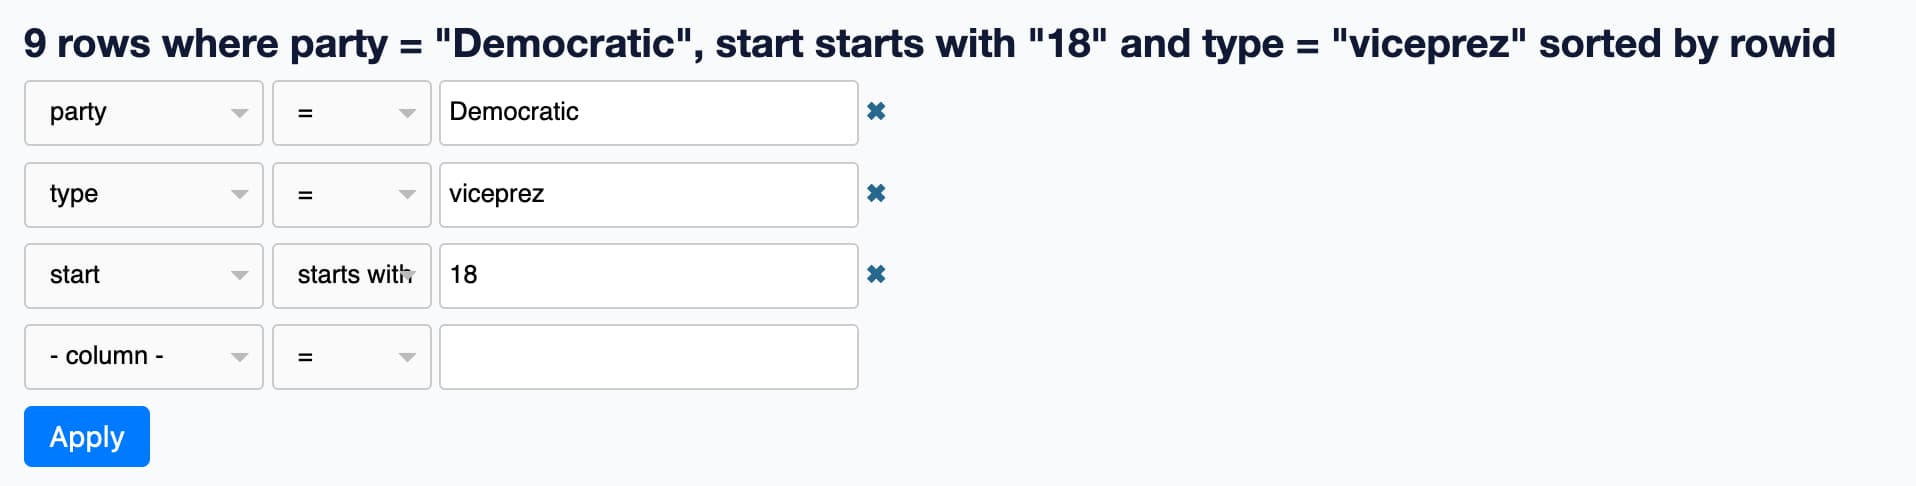 Here an additional row has been added to the filters, specifying that start should start with 18